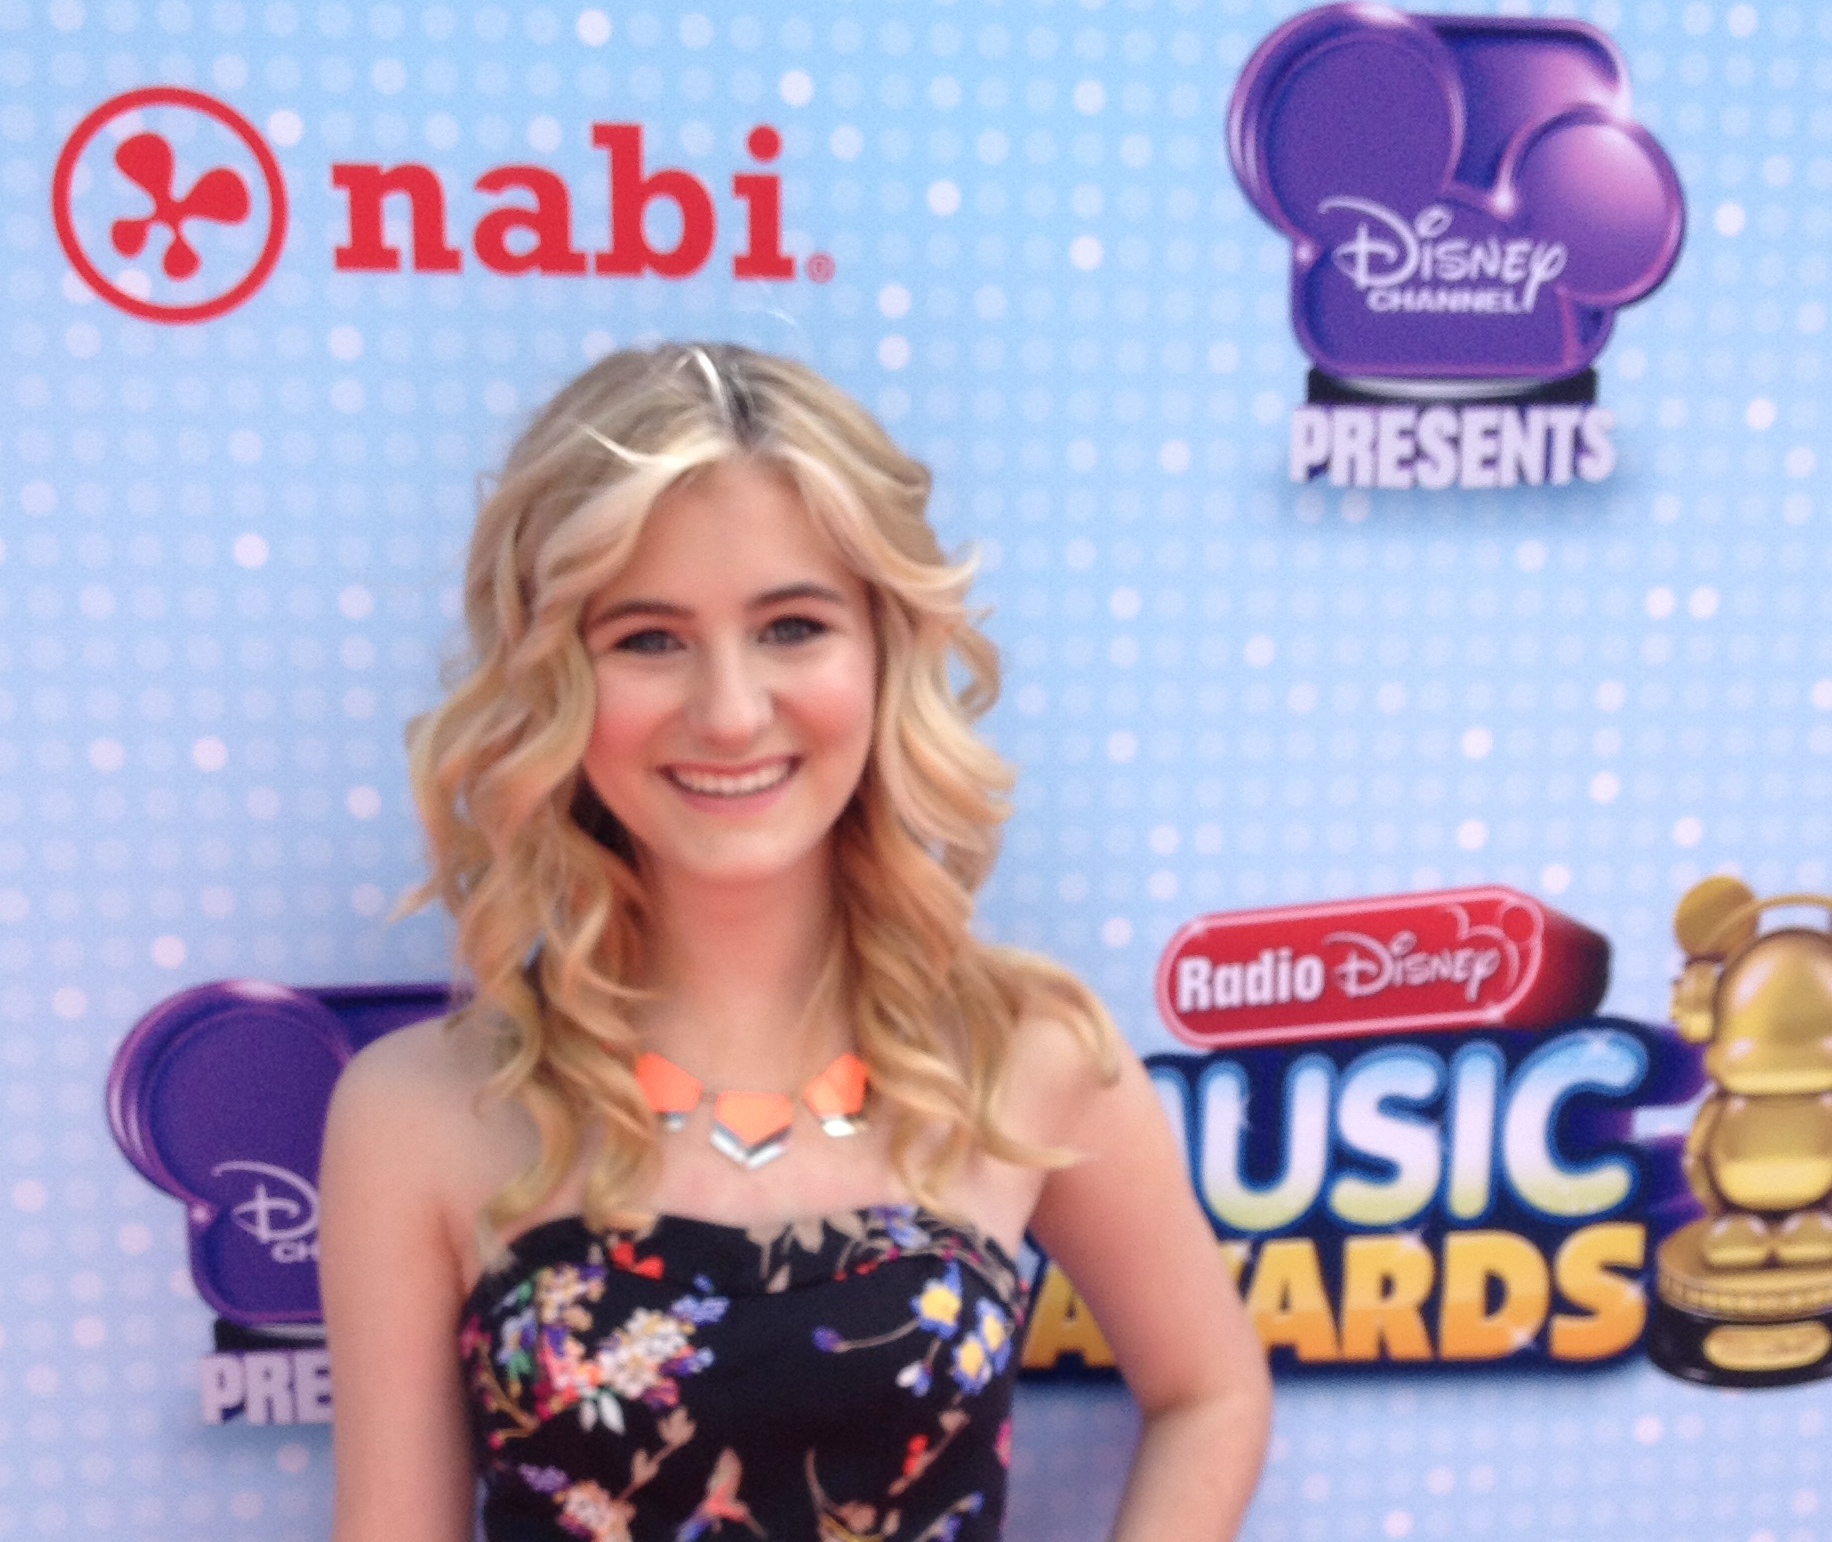 Camryn Sutton on the red carpet at the Radio Disney Music Awards